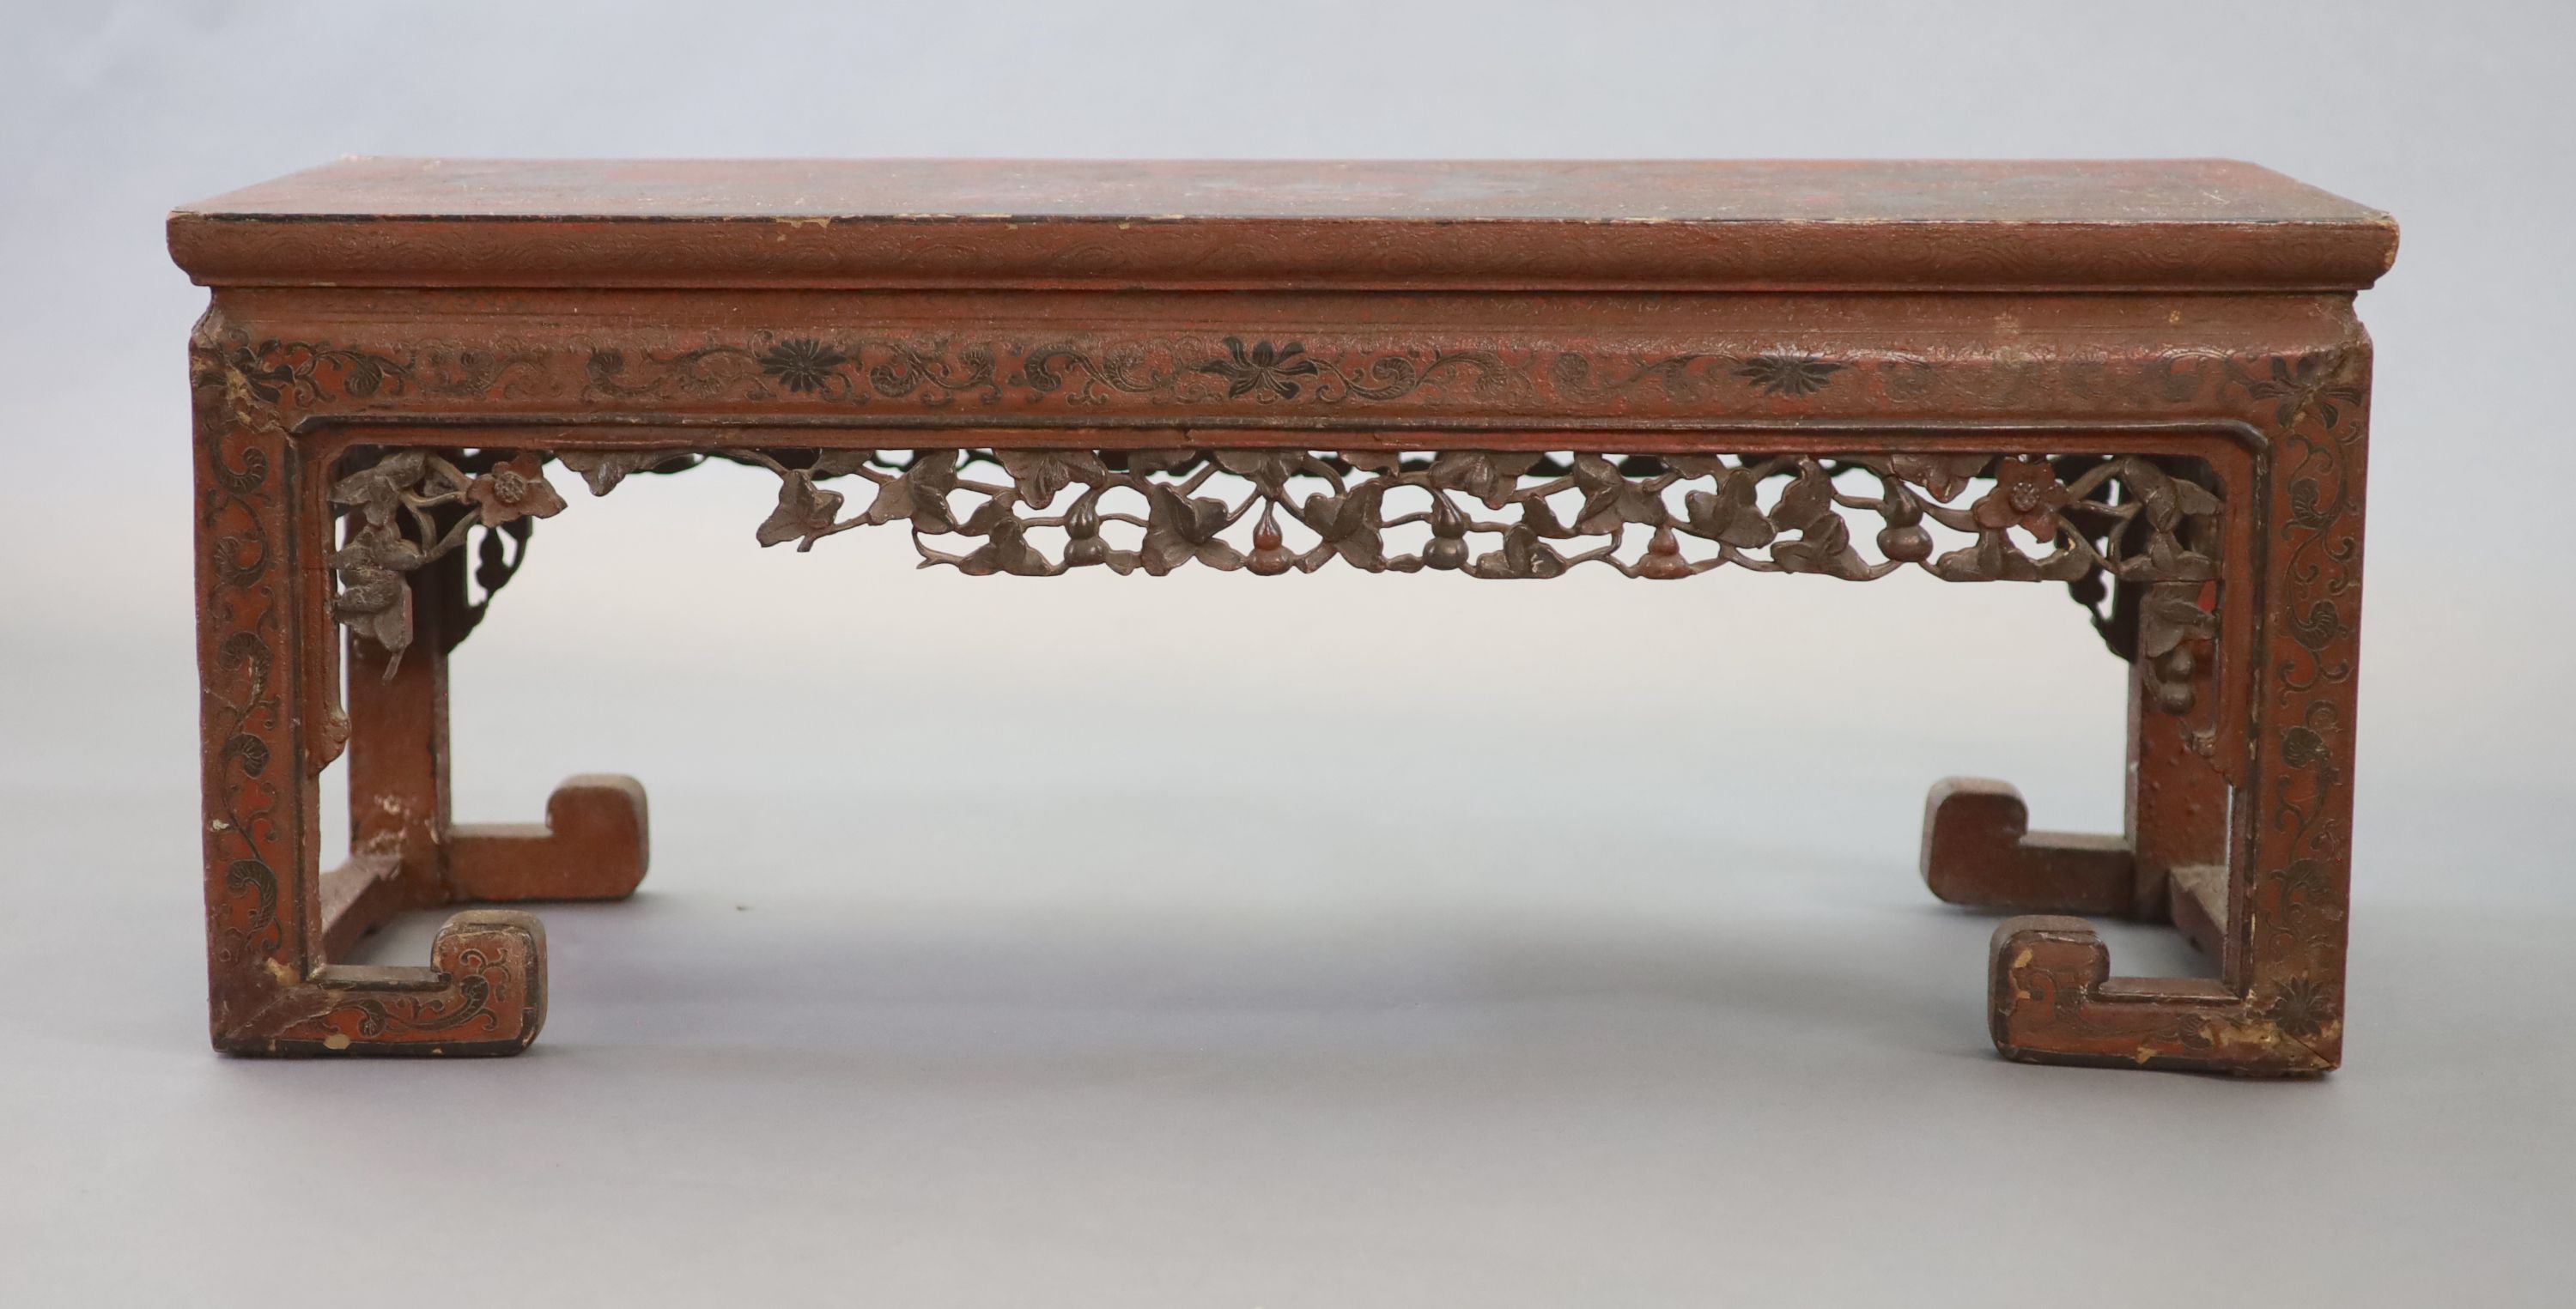 A Chinese coromandel lacquer table or stand, 18th century, 88cm long, 31.5cm long, 35cm high, losses